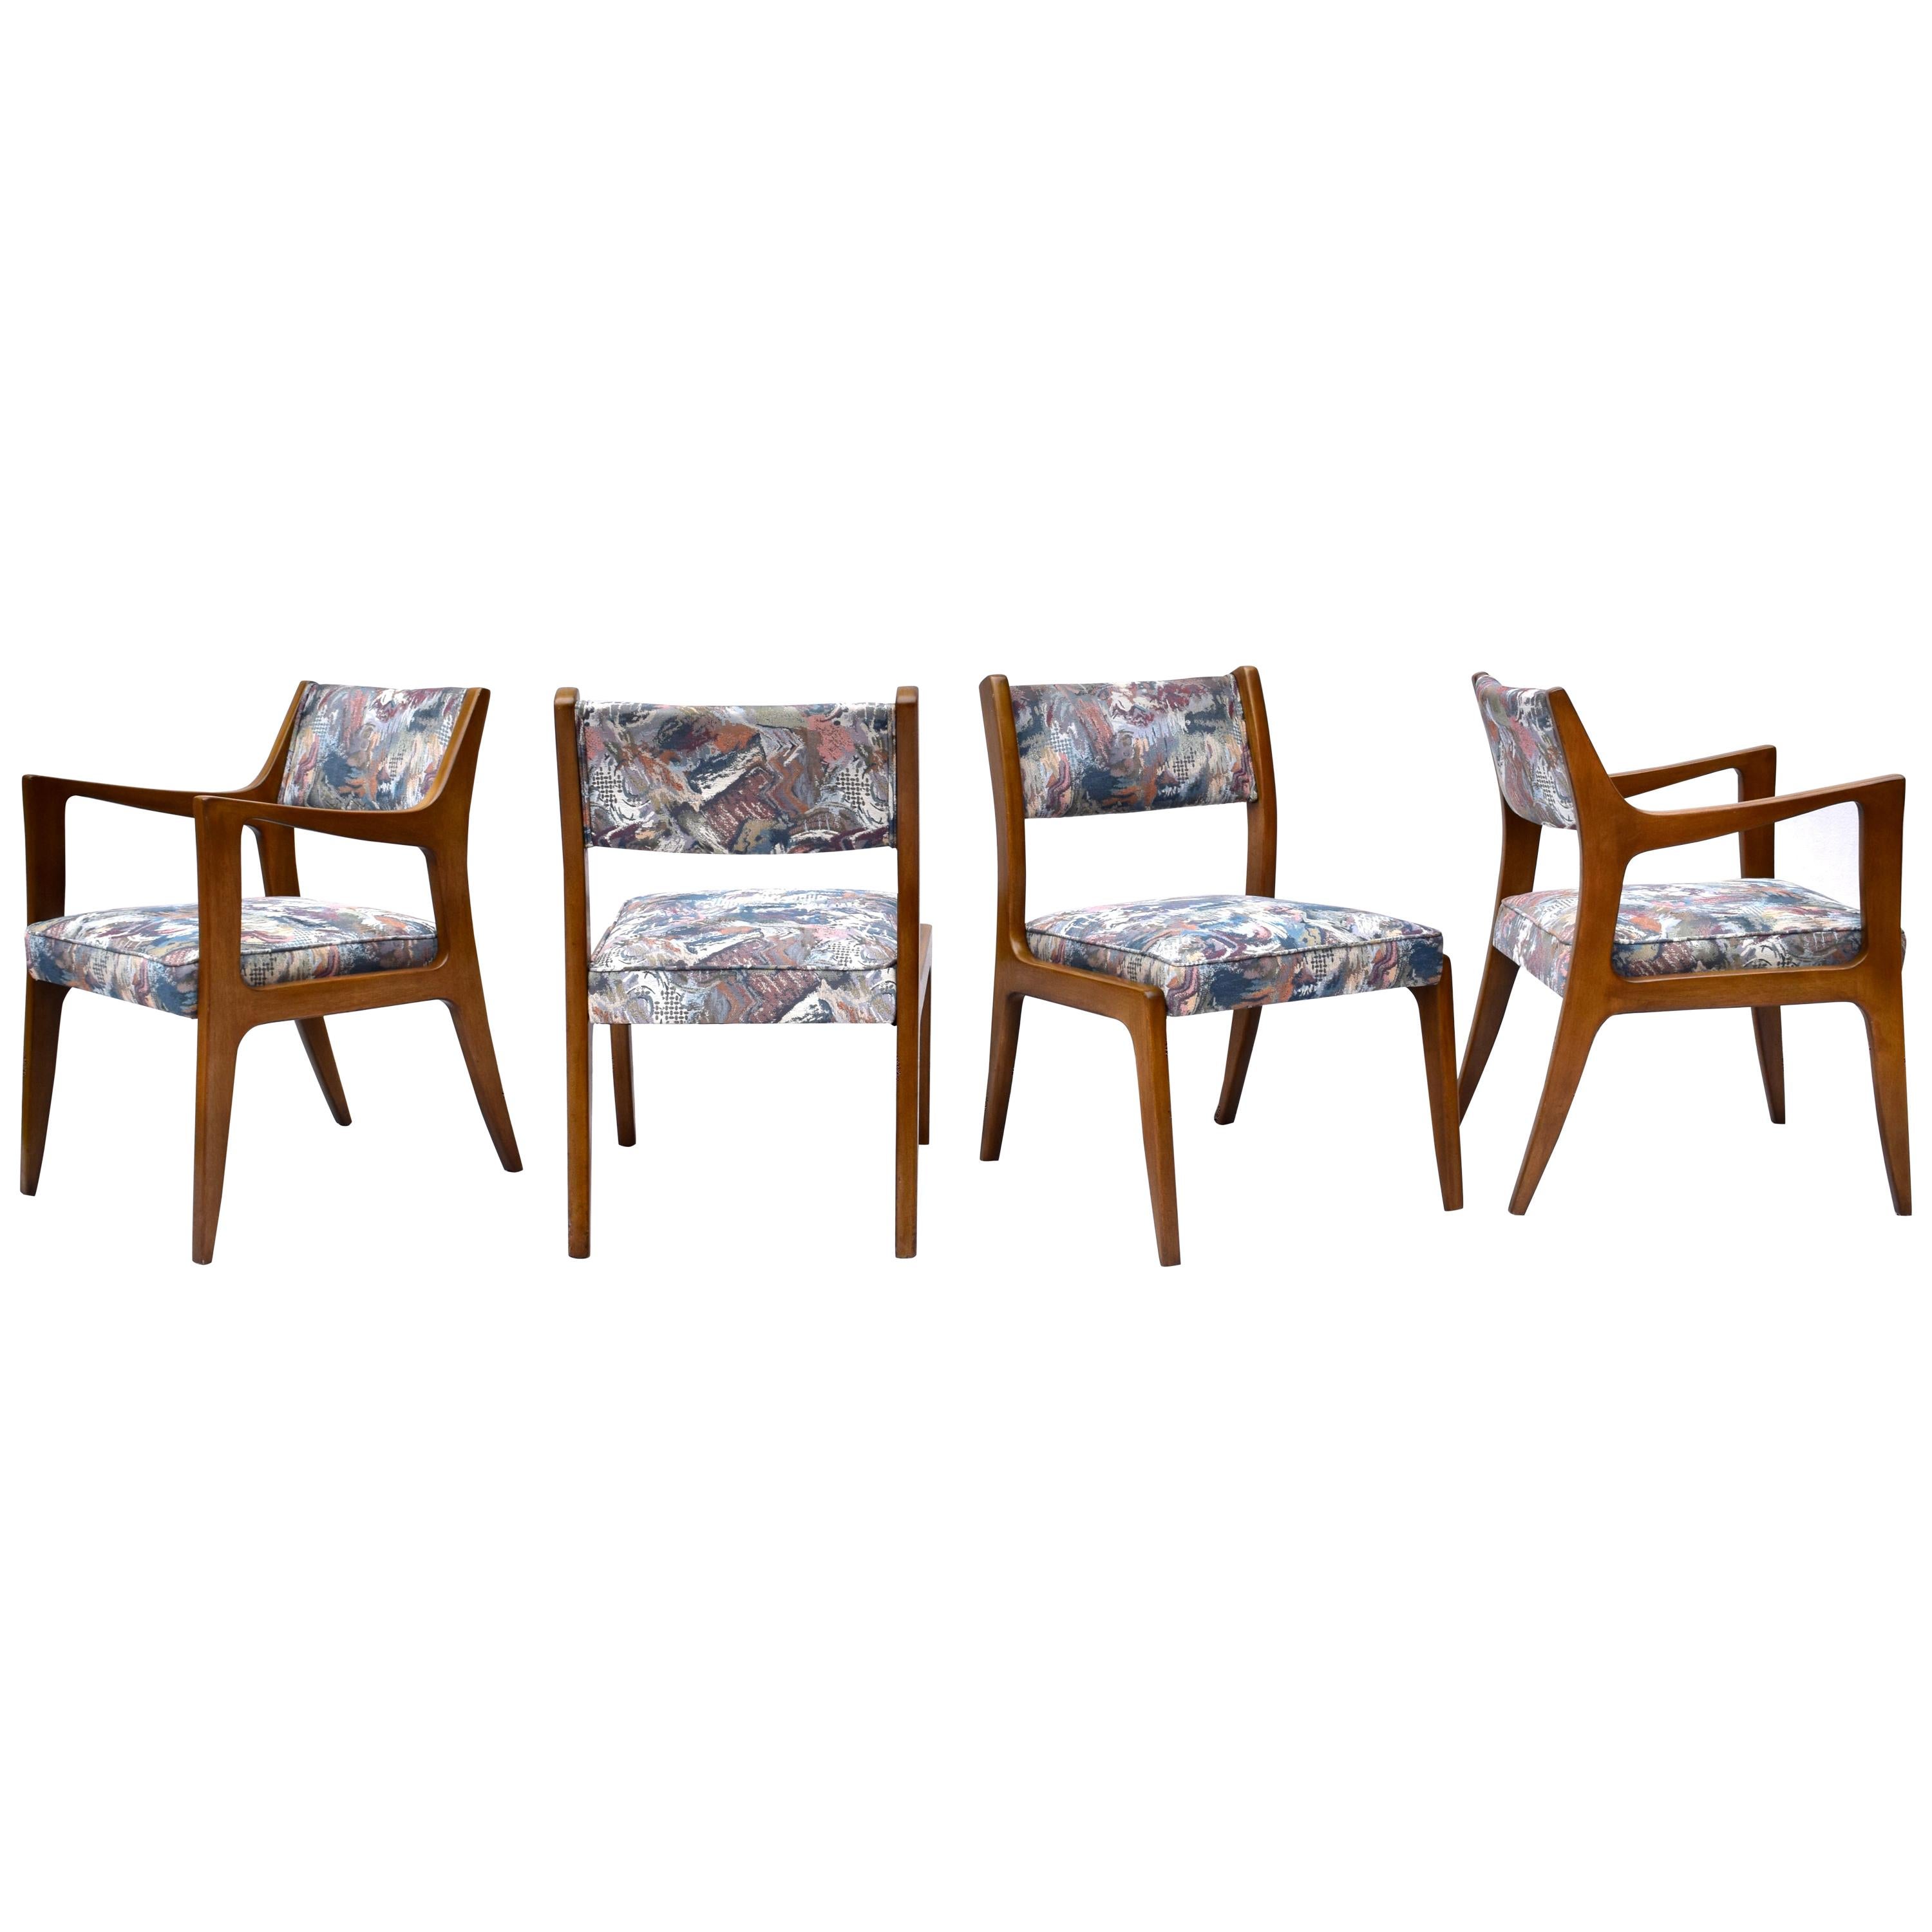 Set of Four Harvey Probber Mahogany Dining Chairs, 1950s For Sale